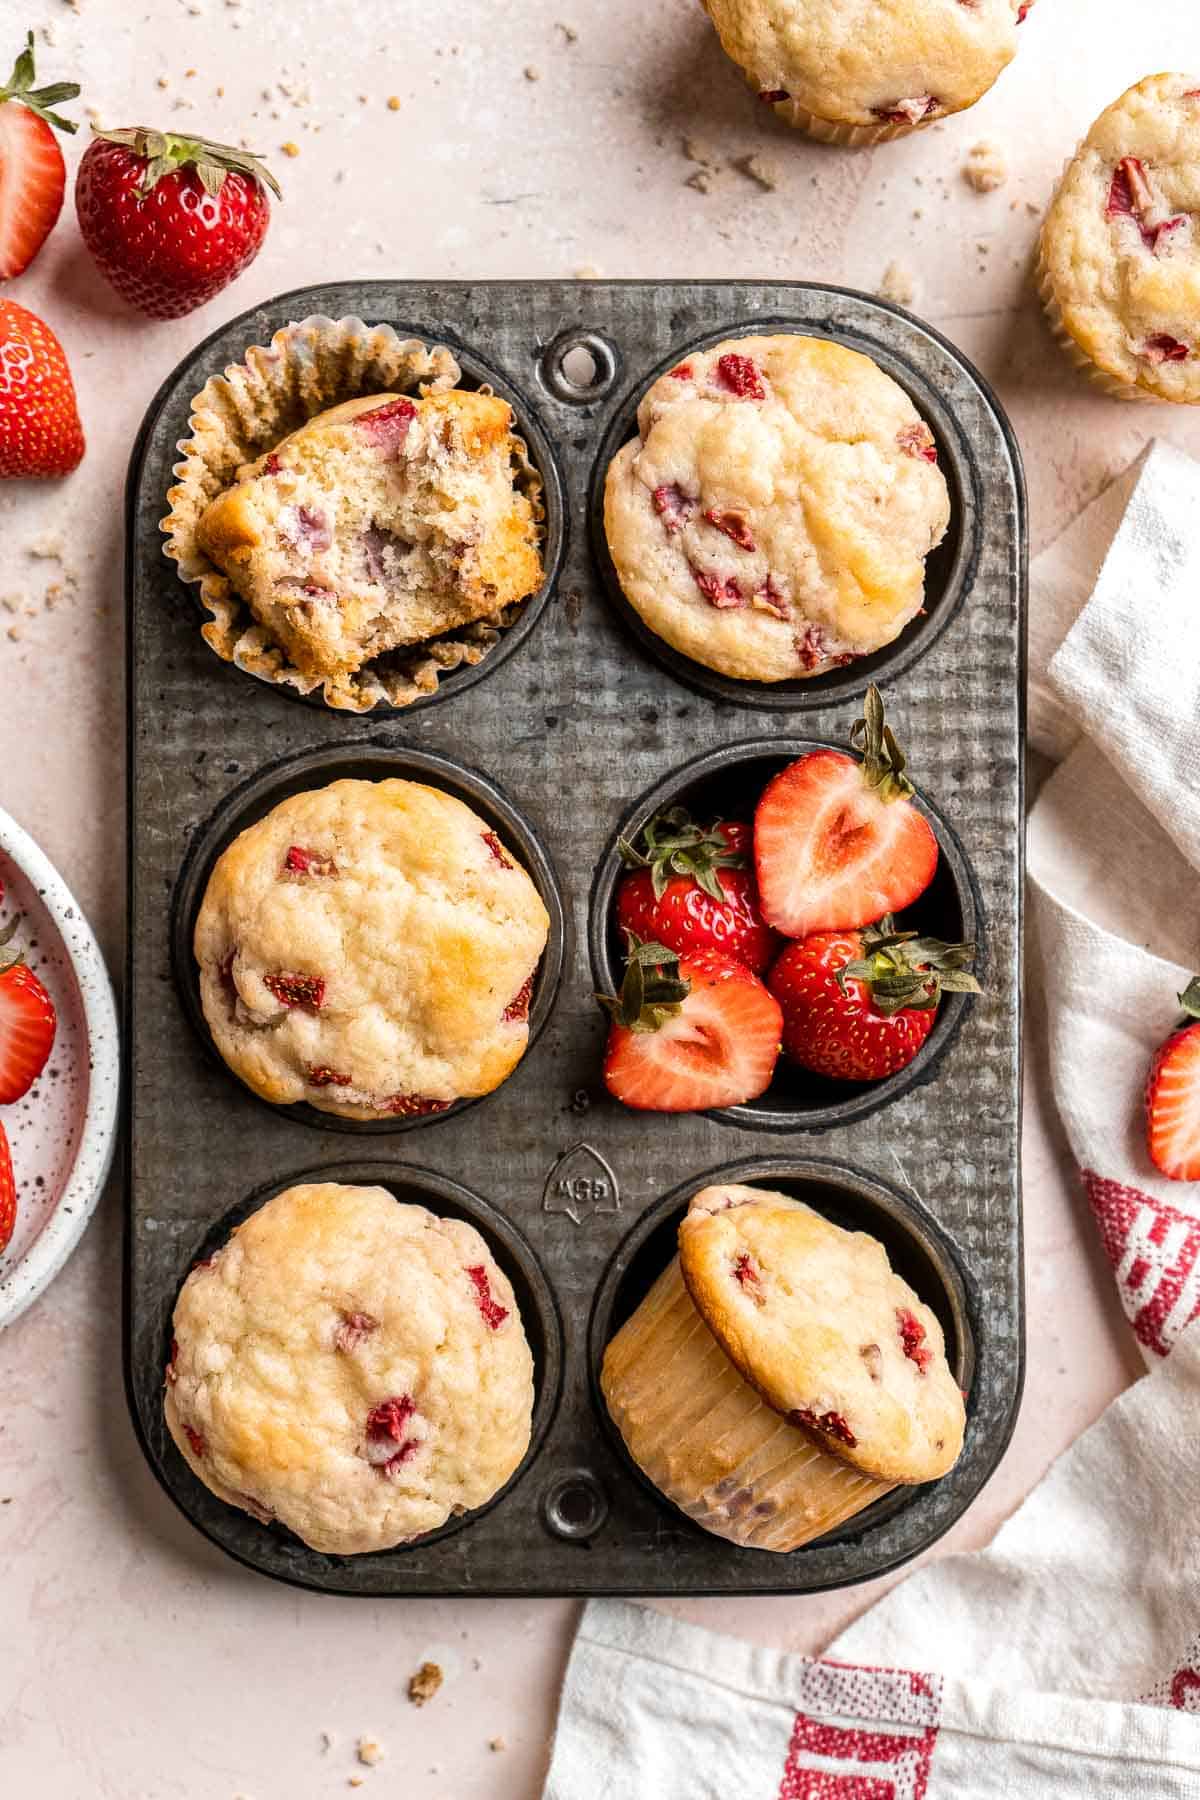 Strawberry Muffins are tender, fluffy, and delicious! They are golden-brown and crisp outside while moist and cake-like inside and loaded with strawberries. | aheadofthyme.com